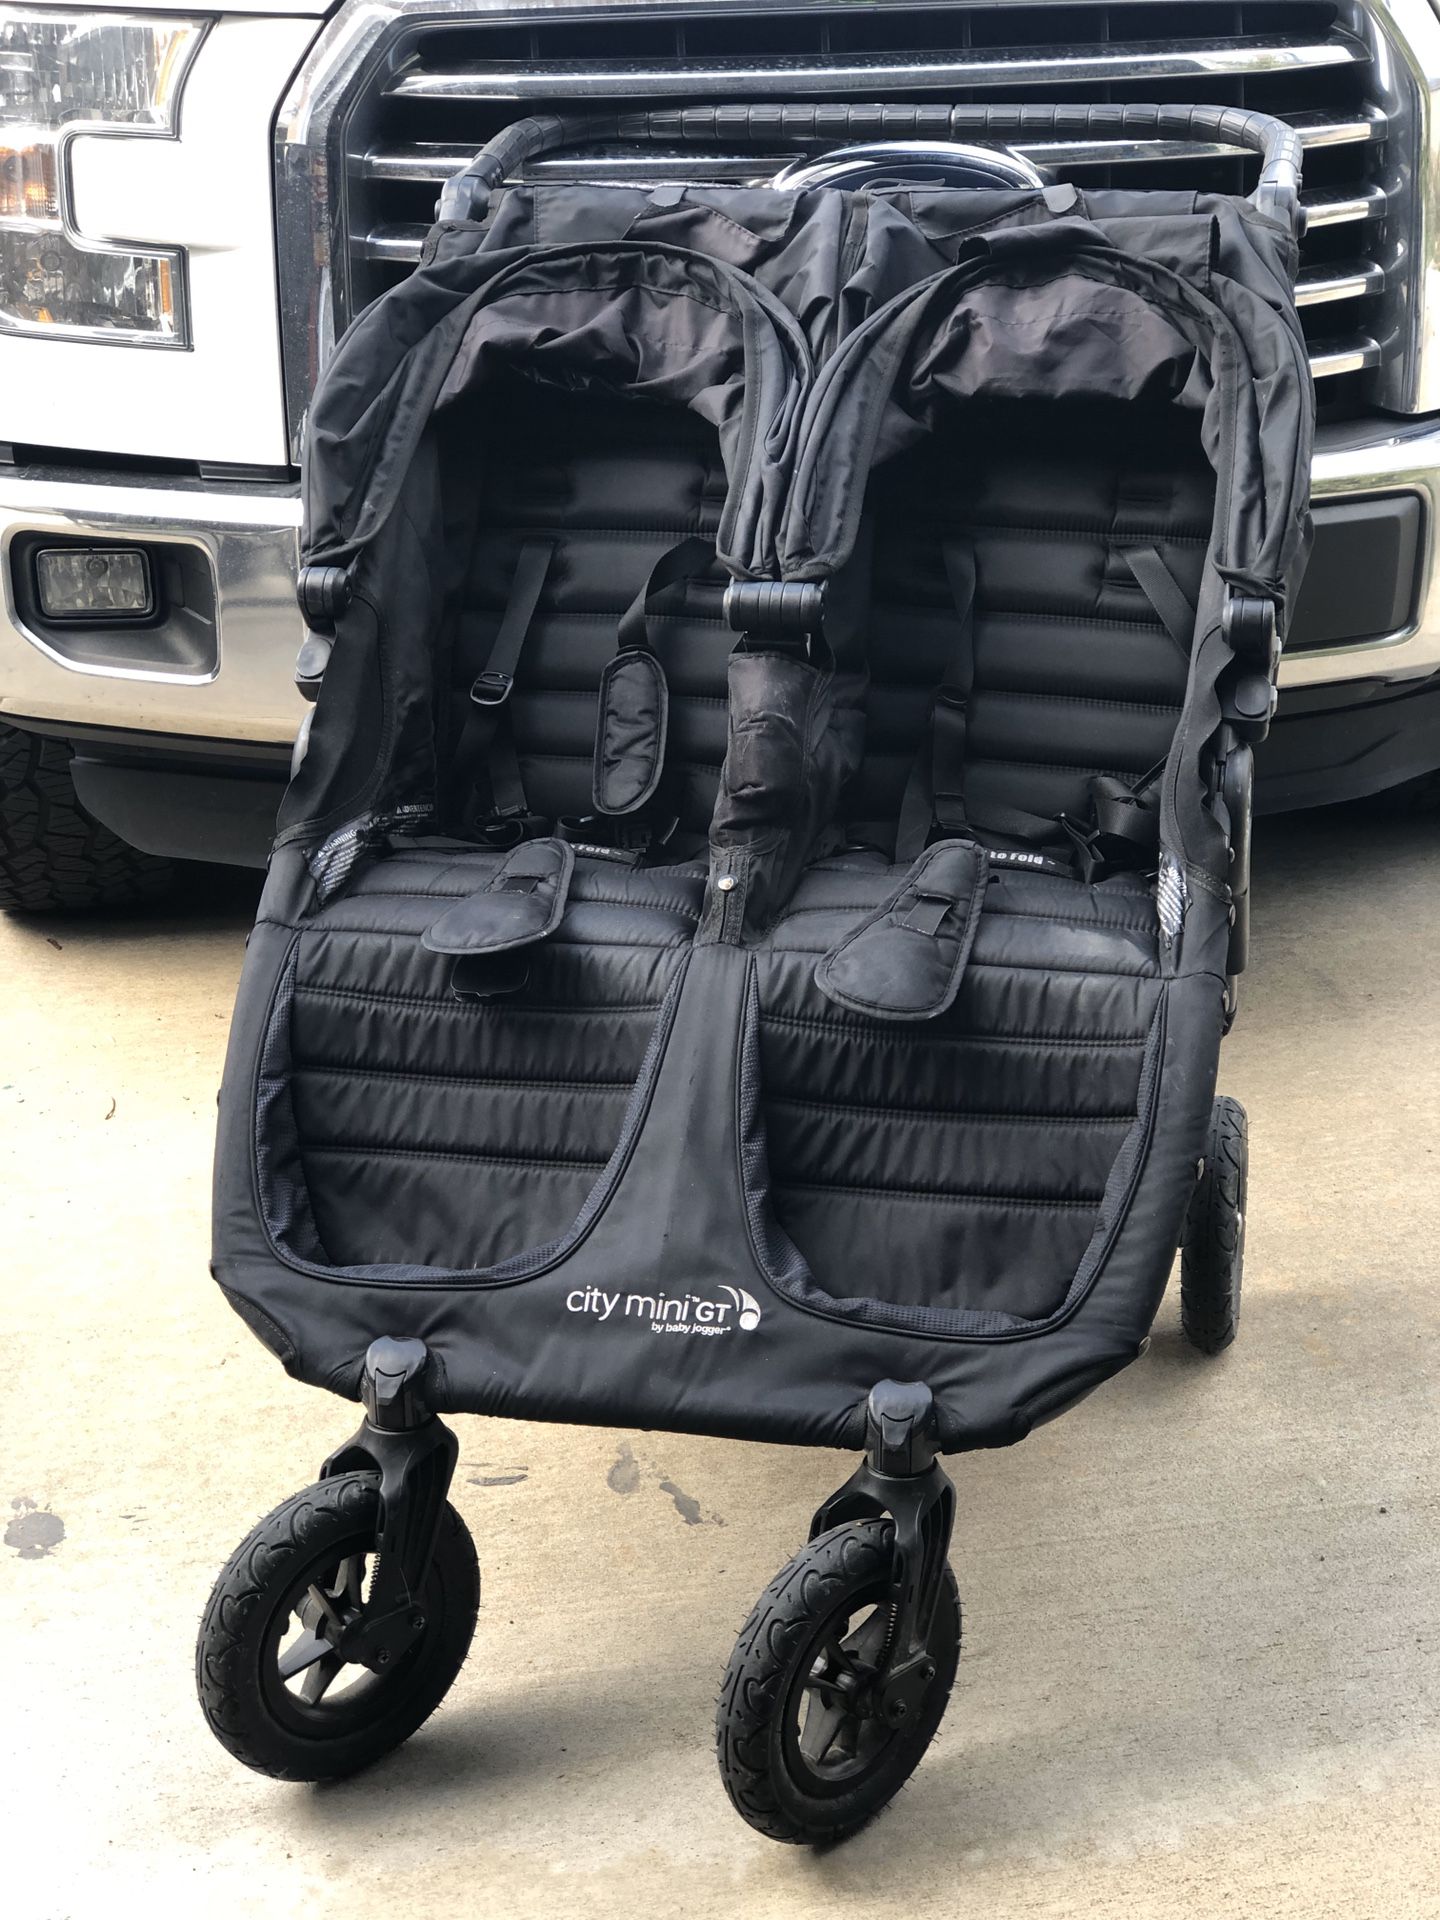 2 double strollers